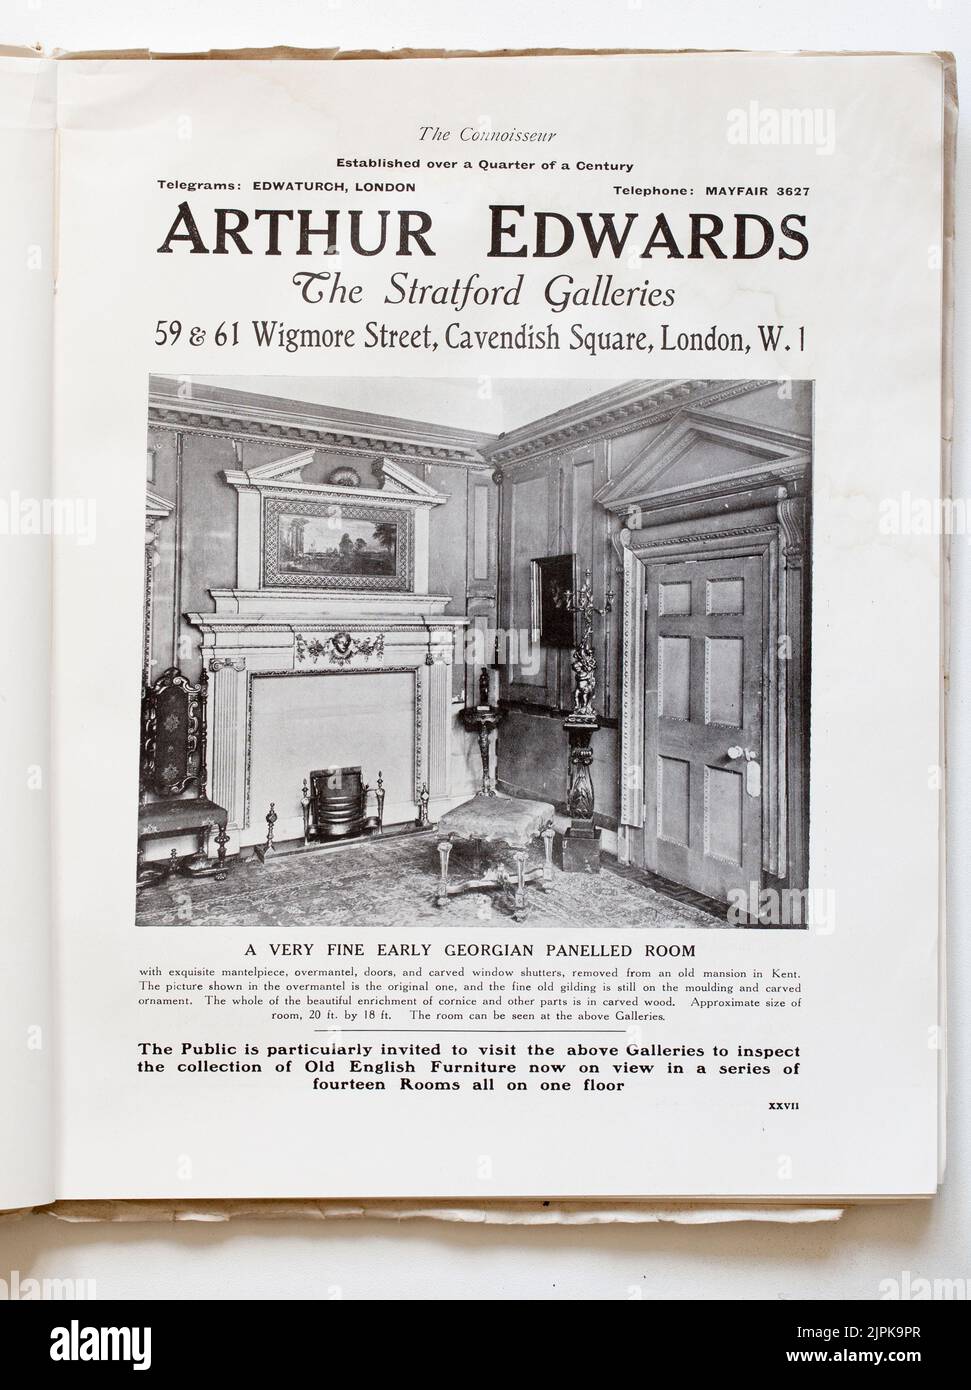 Advertising in The Connoisseur Antiques Magazine Stock Photo